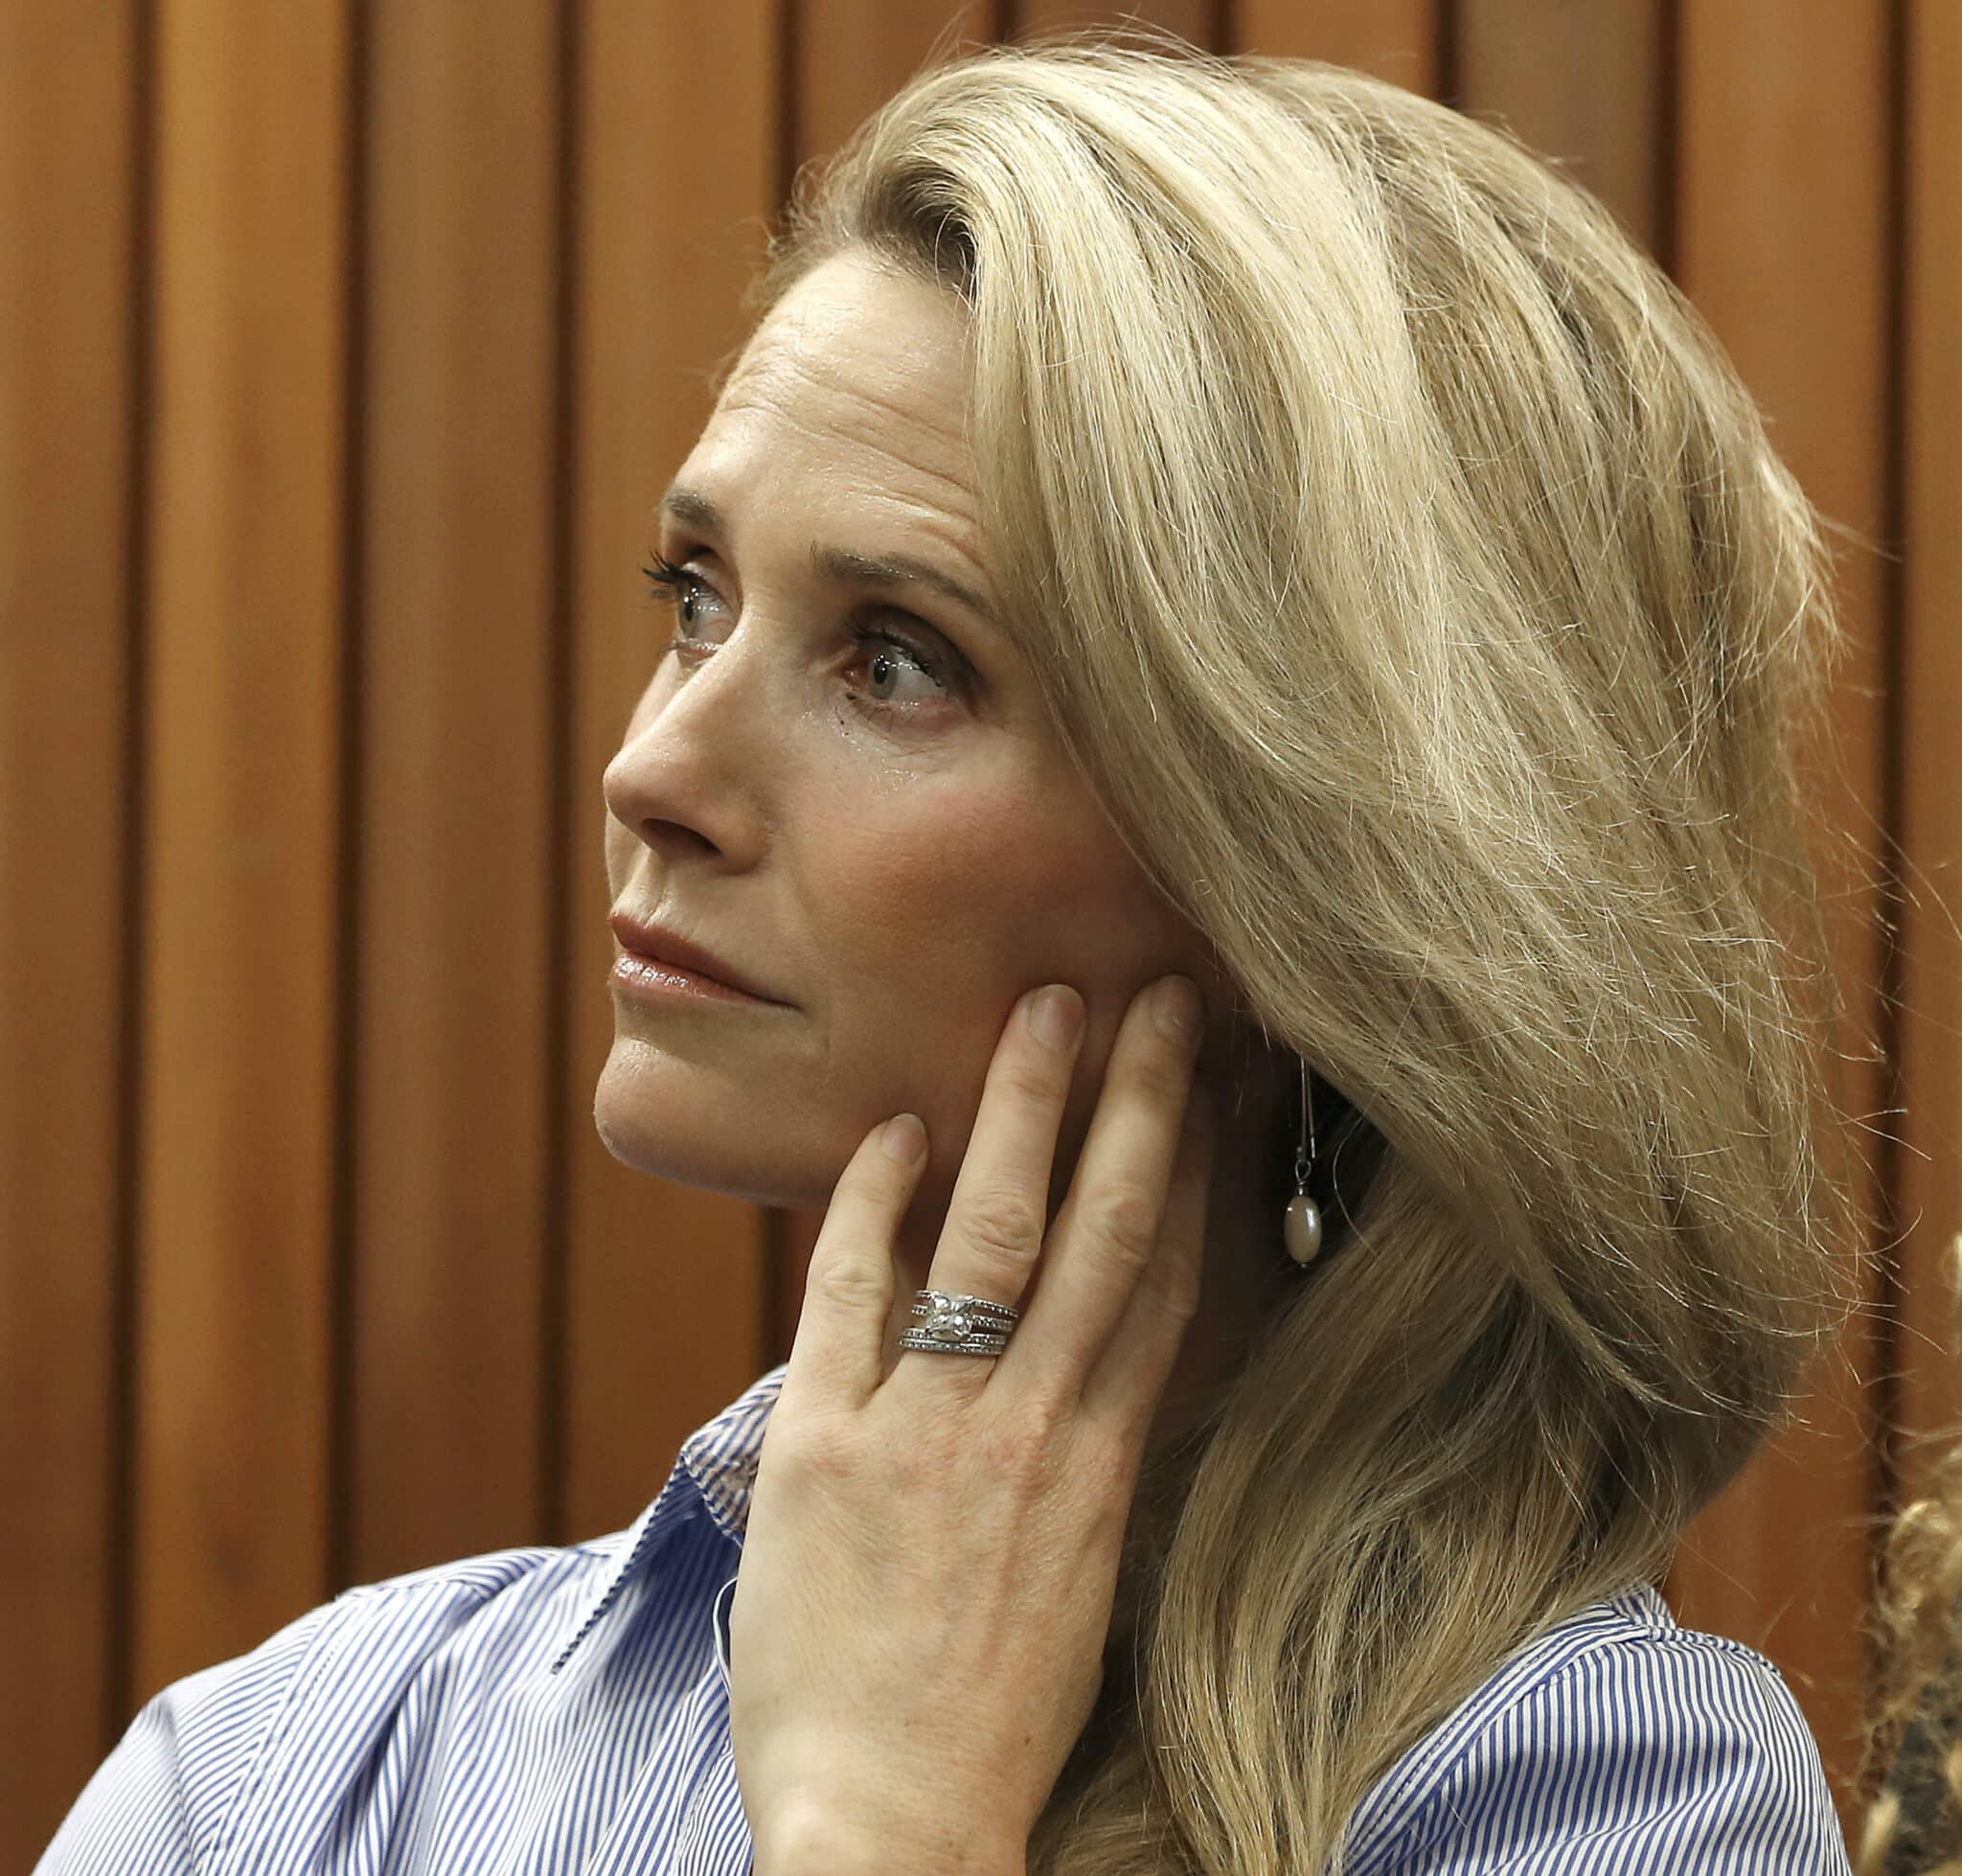 FILE - Jennifer Siebel Newsom listens as her husband, Gov. Gavin Newsom, discusses his revised state budget during a news conference on May 9, 2019, in Sacramento, Calif. Siebel Newsom, a documentary filmmaker and the wife of California governor Gavin Newsom, has taken the stand at the trial of Harvey Weinstein. Newsom is the fourth of the women Weinstein is accused of assaulting to testify at his Los Angeles trial. (AP Photo/Rich Pedroncelli, File)